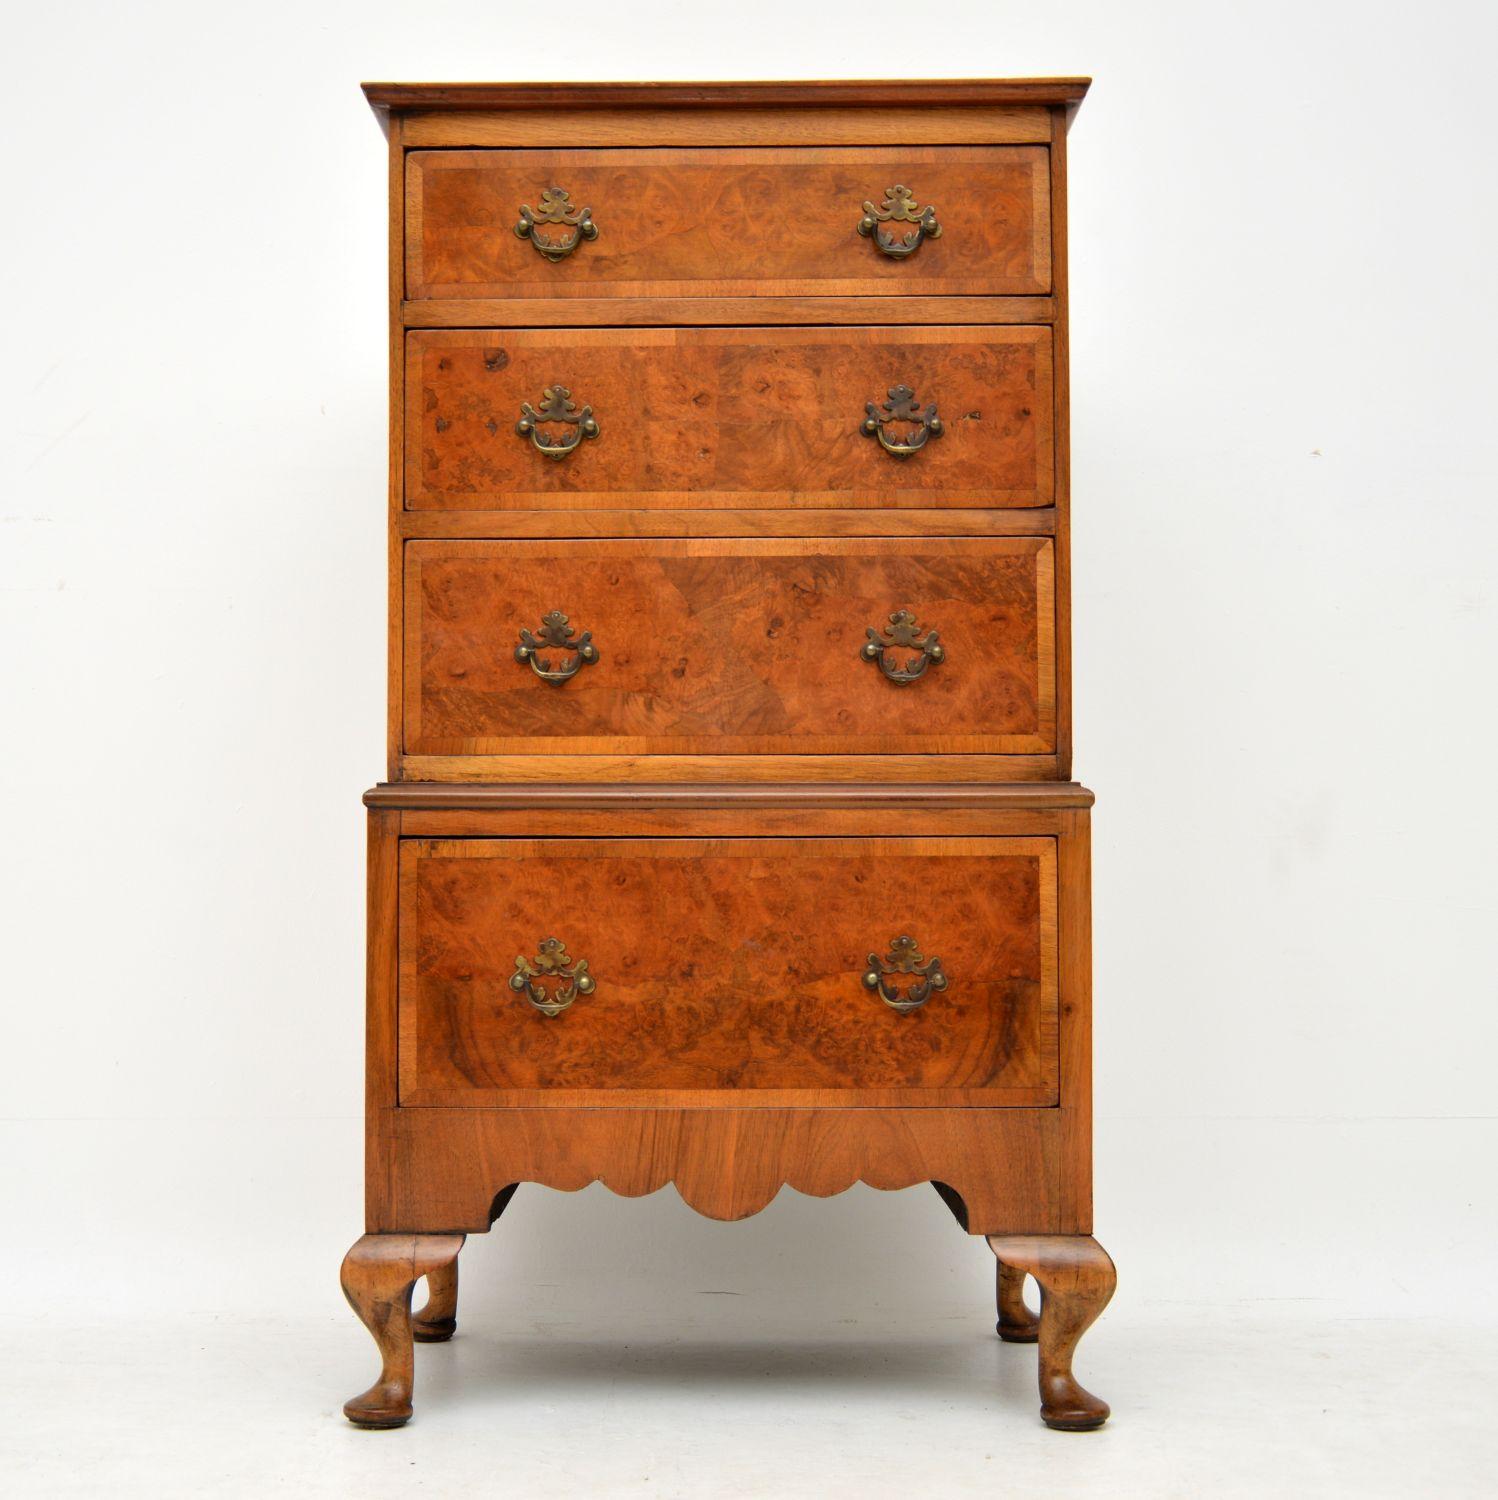 Antique burr walnut chest on chest of small proportions & of high quality. It’s Queen Anne style & dates from circa 1910 period. The top is burr walnut with a figured walnut cross banding, while the drawer fronts are the same. The drawers are